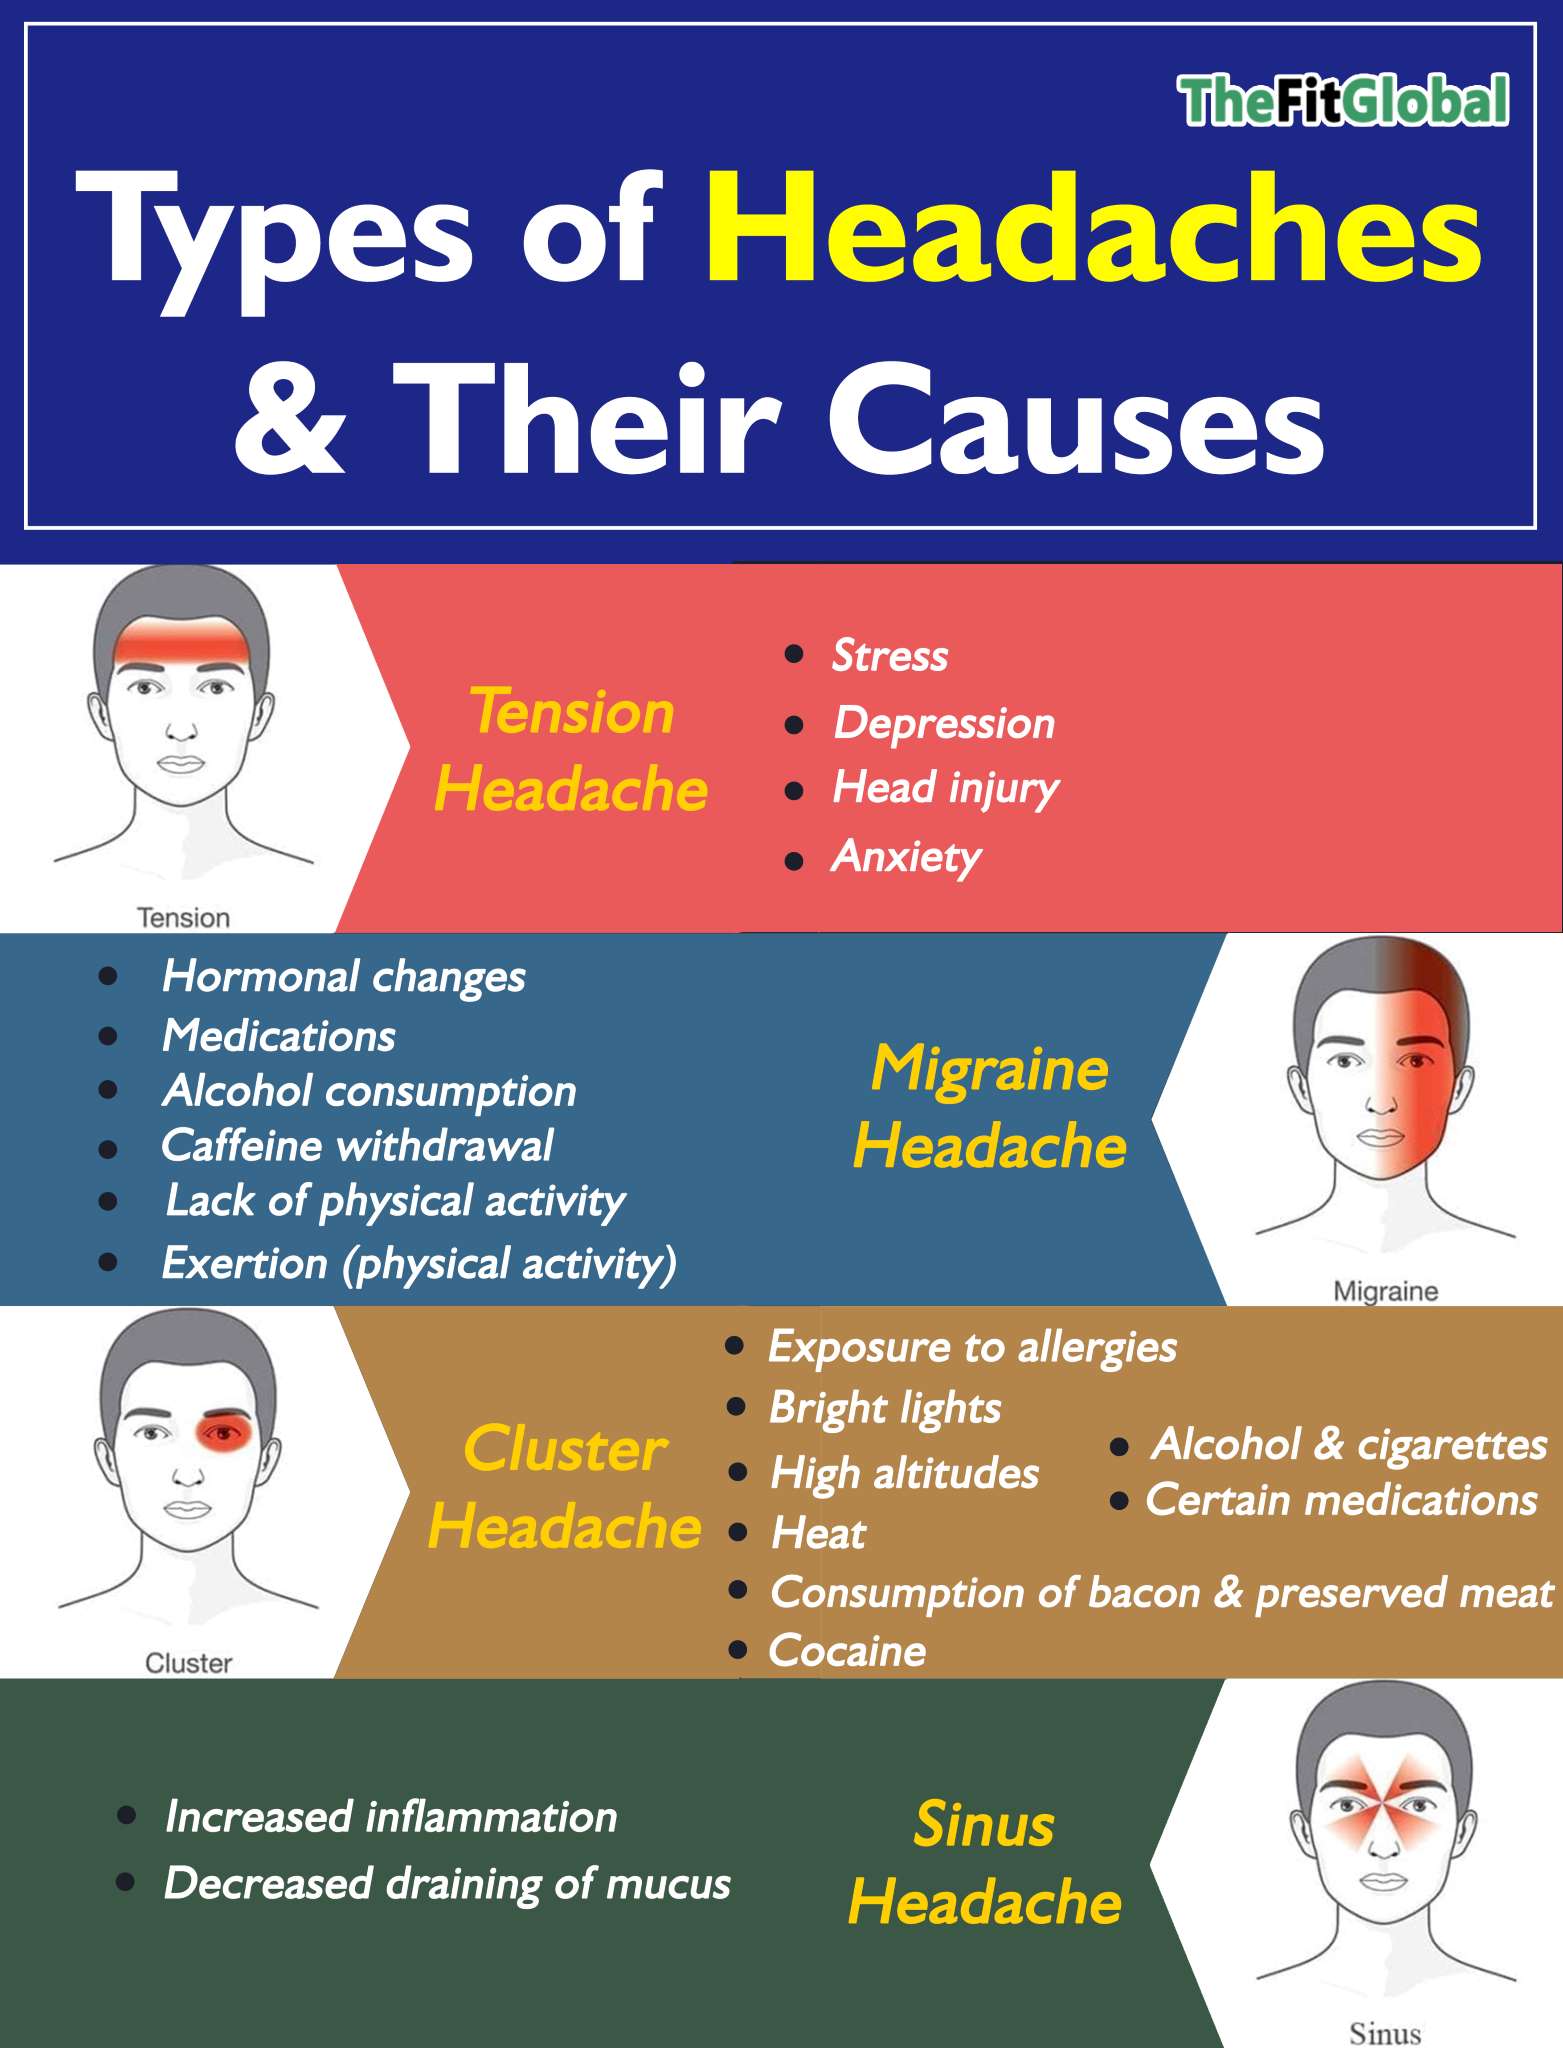 Types of Headaches and their causes